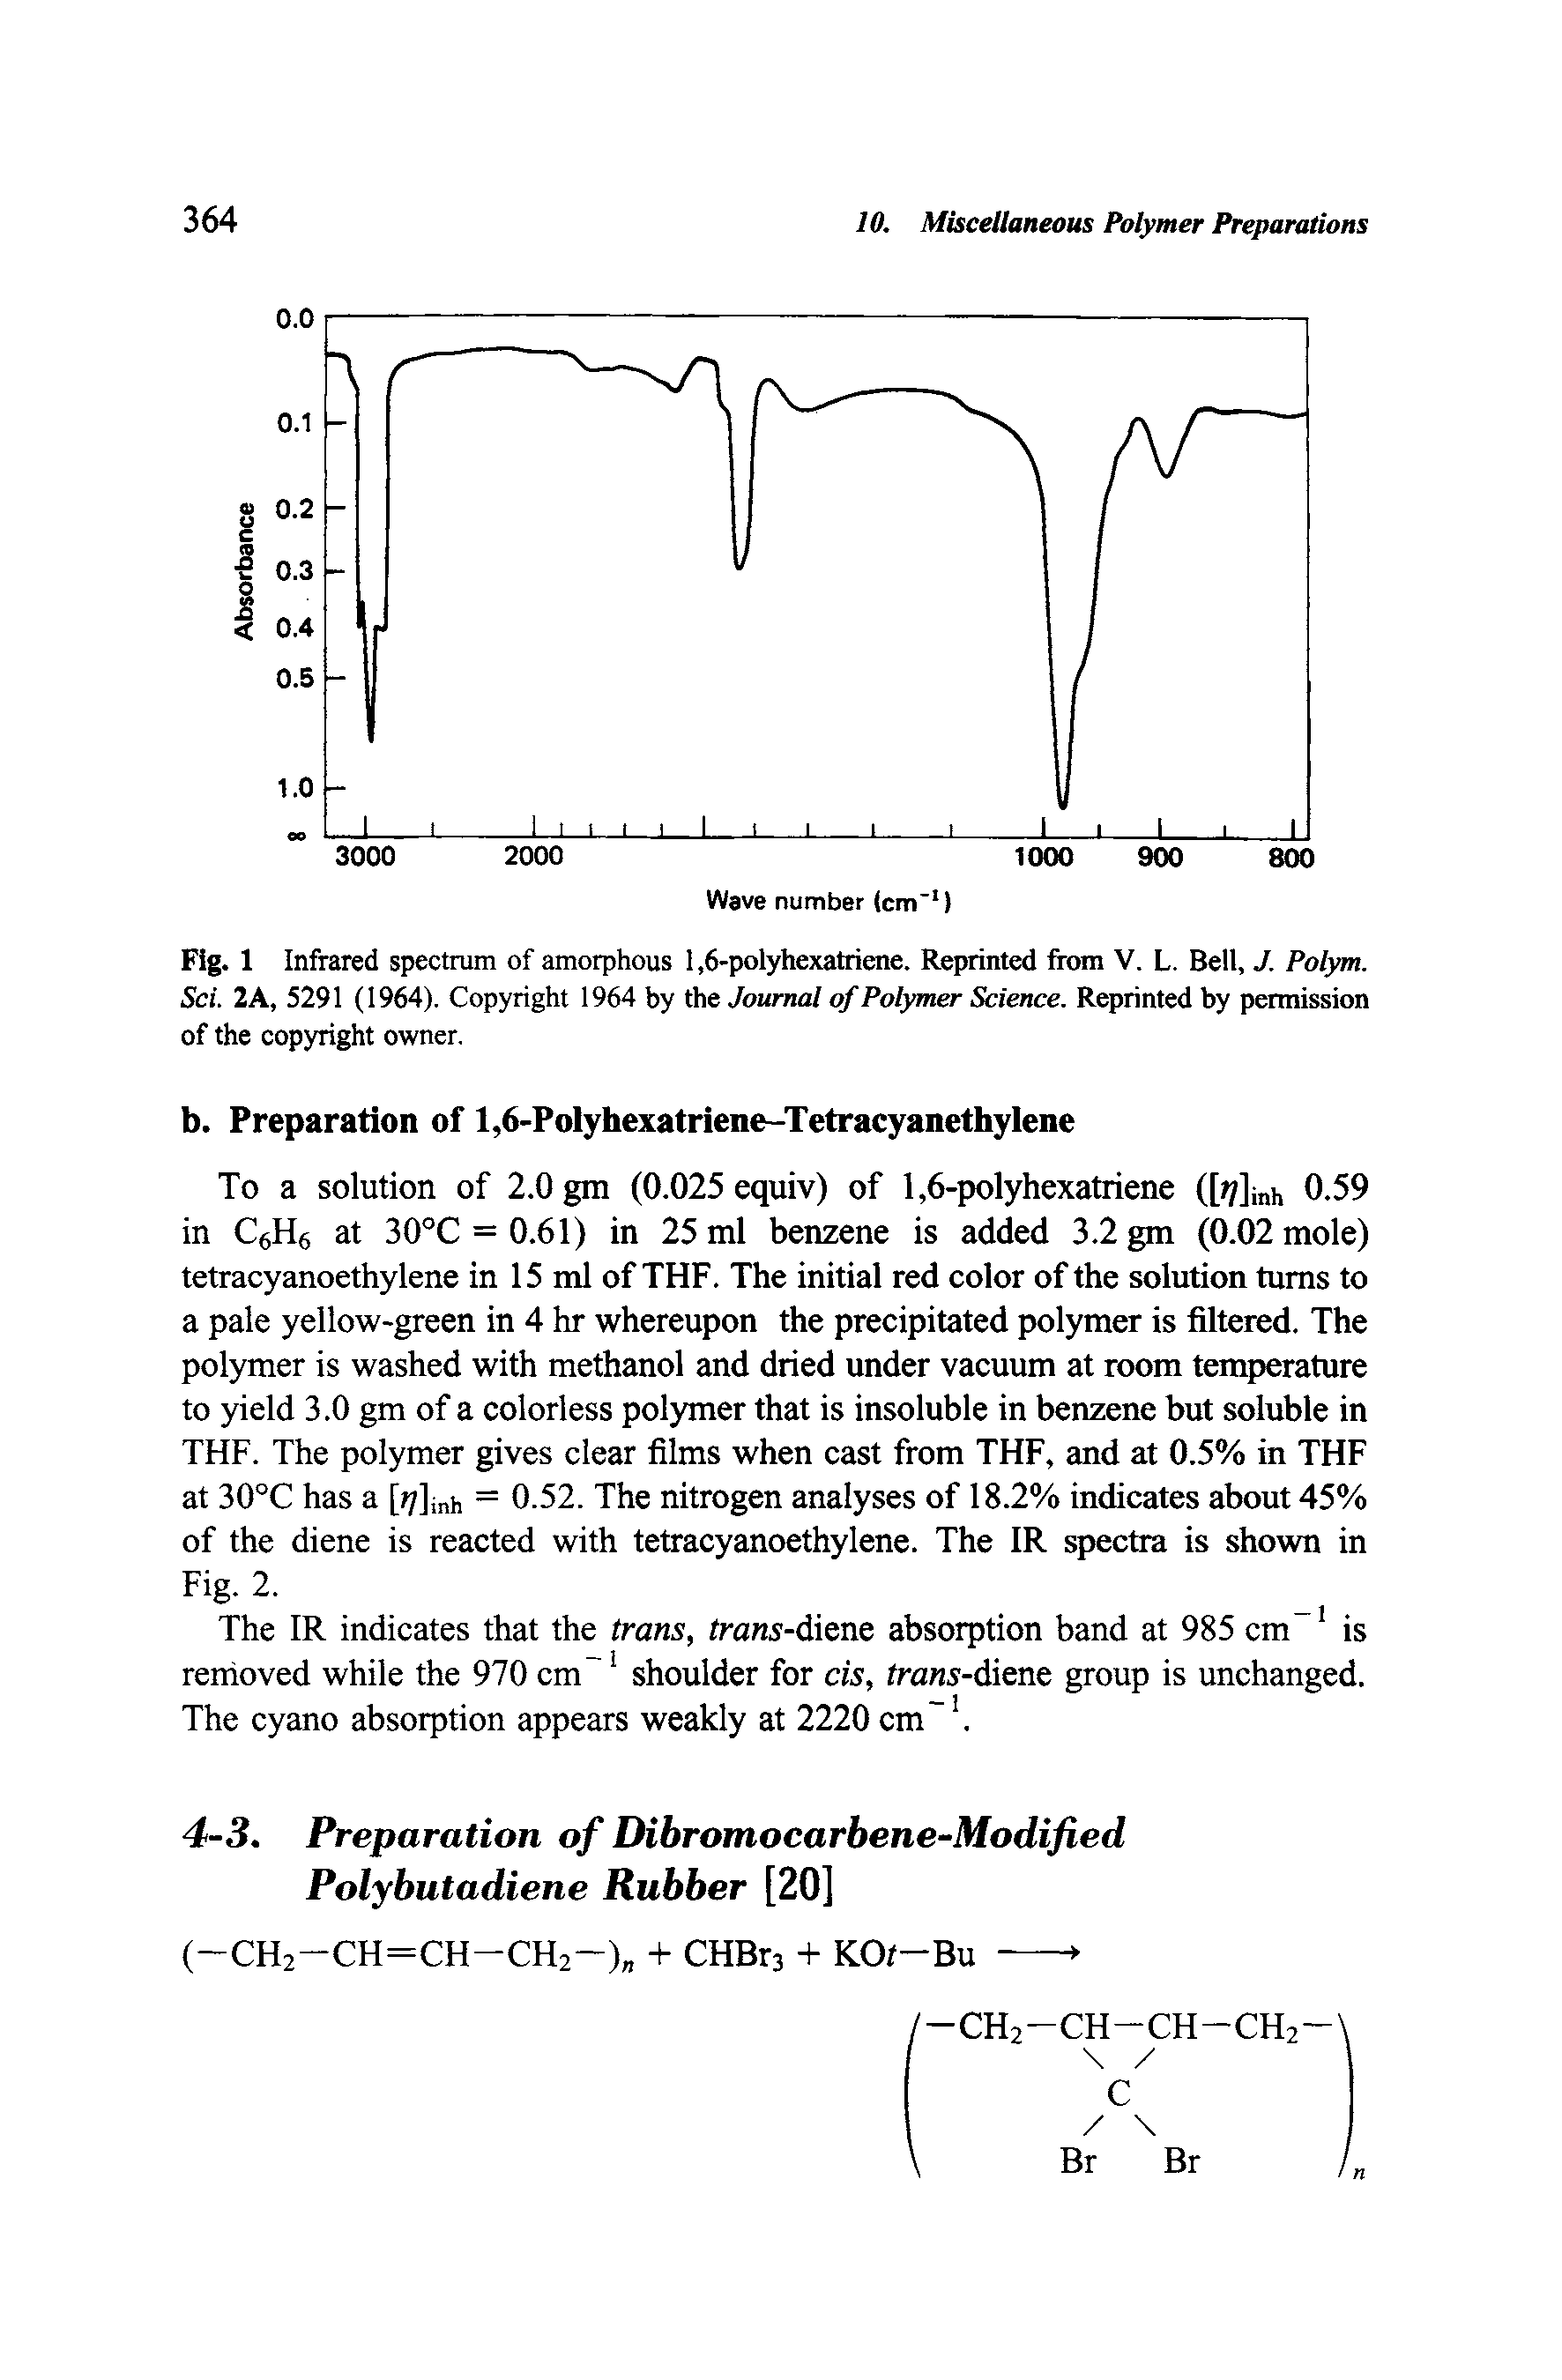 Fig. 1 Infrared spectrum of amorphous 1,6-polyhexatriene. Reprinted from V. L. Bell, J. Polym. Sci. 2A, 5291 (1964). Copyright 1964 by Oae Journal of Polymer Science. Reprinted by permission of the copyright owner,...